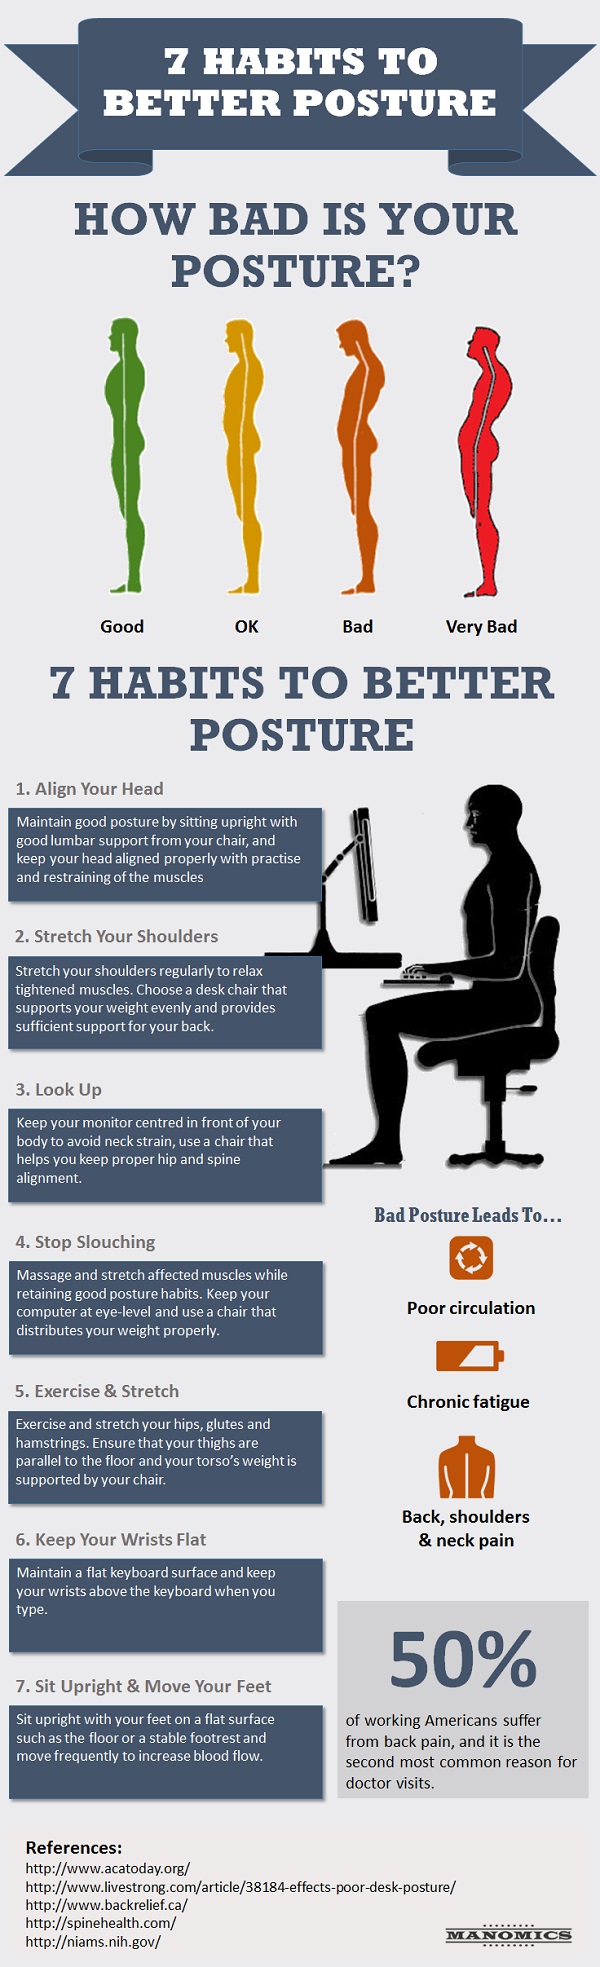 7 Habits To Better Posture